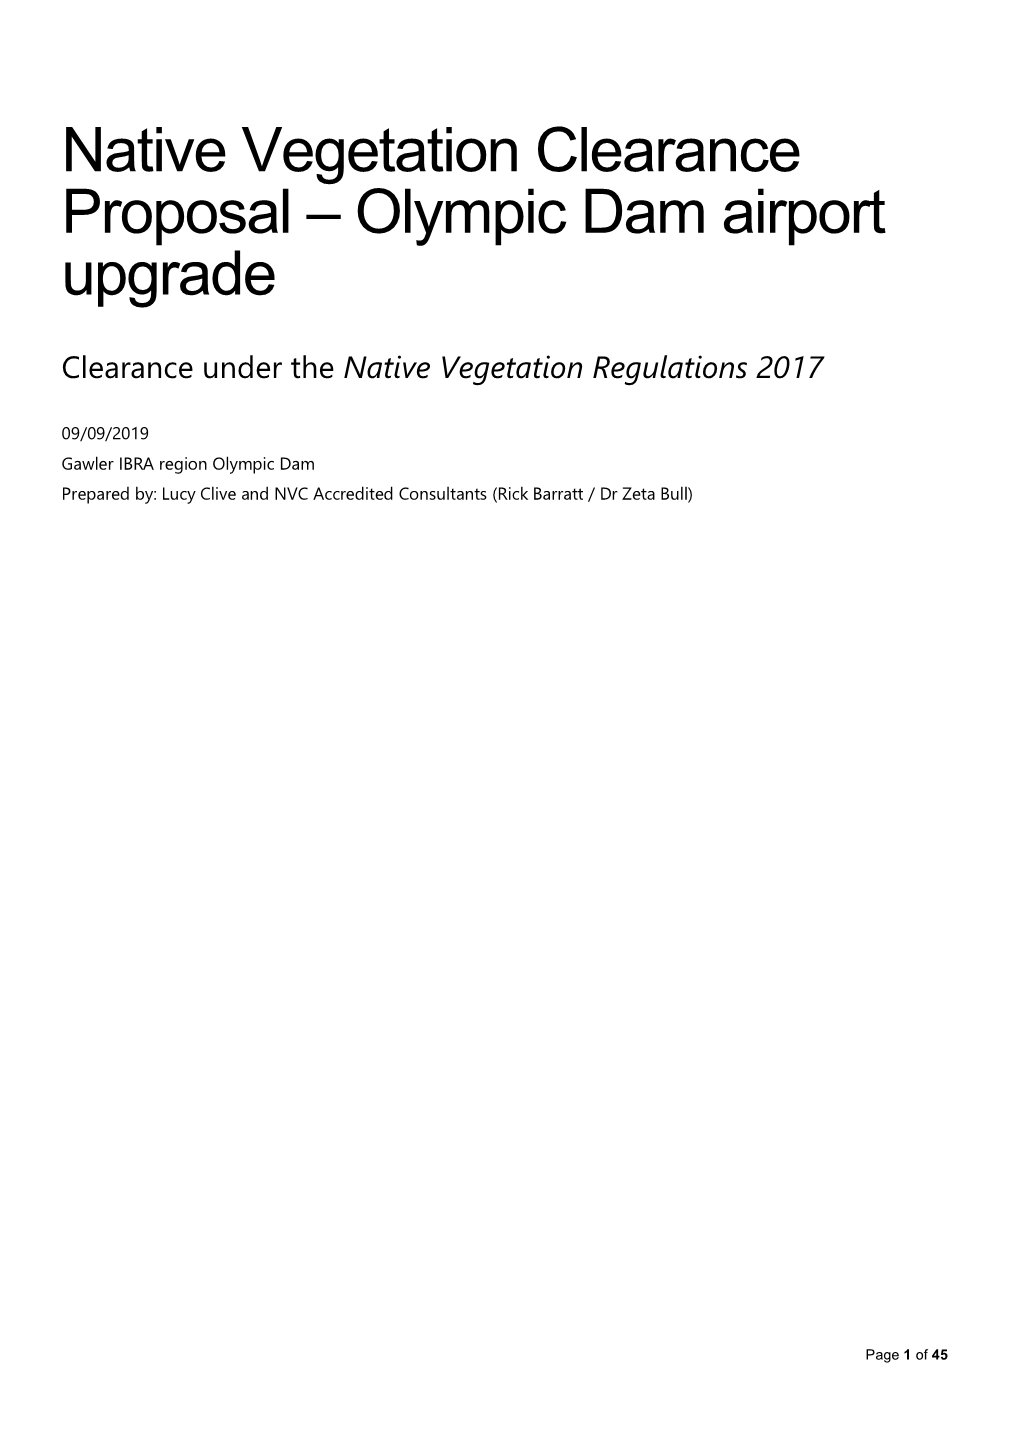 Native Vegetation Clearance Proposal – Olympic Dam Airport Upgrade